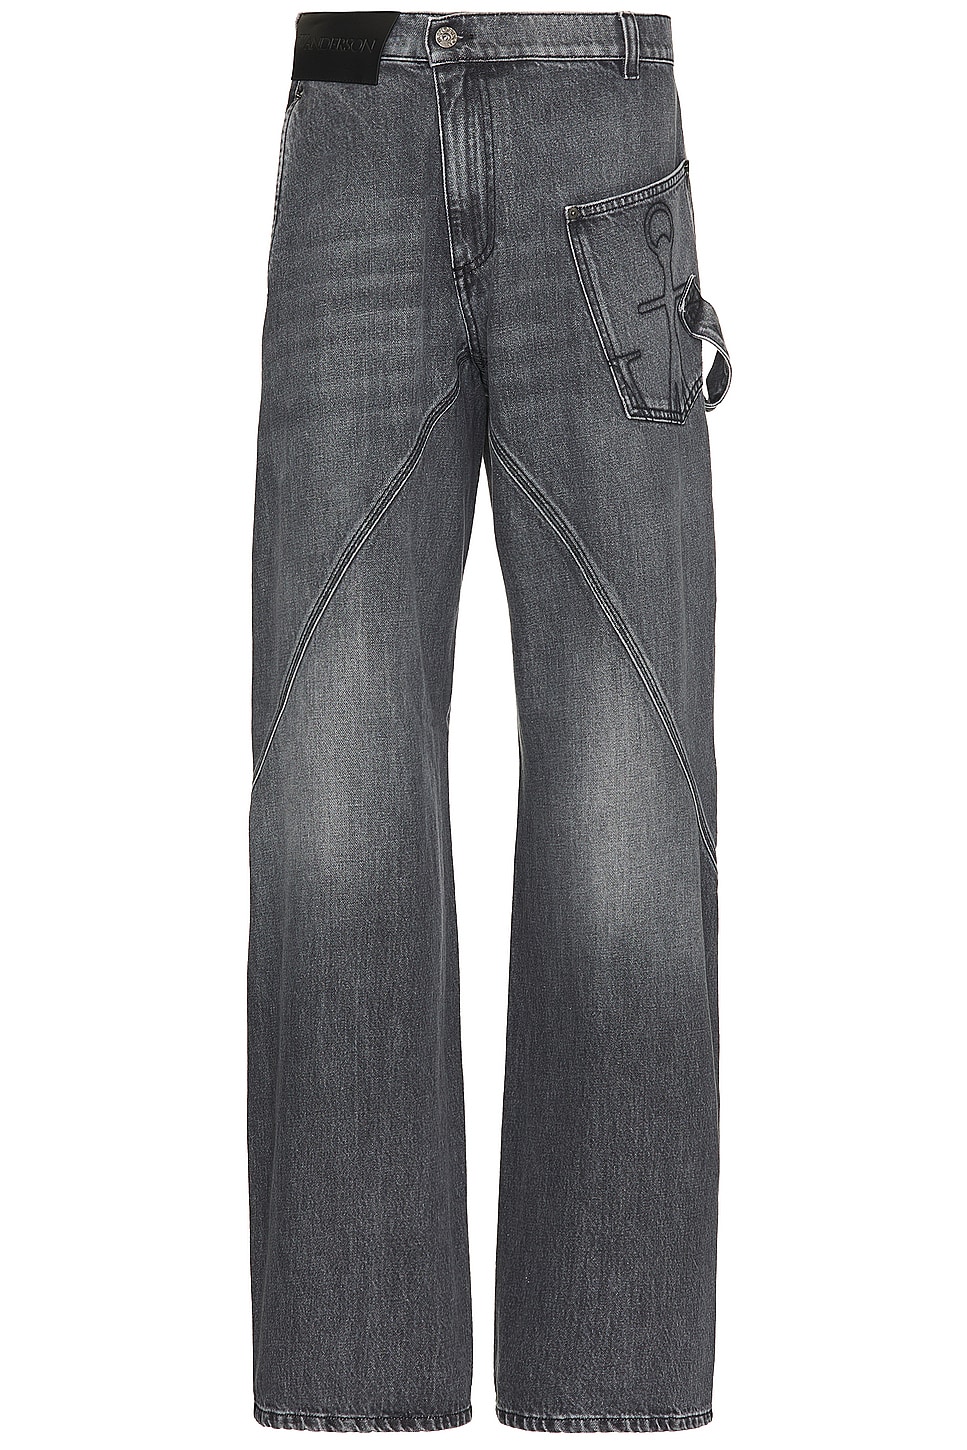 Image 1 of JW Anderson Twisted Workwear Jeans in Grey